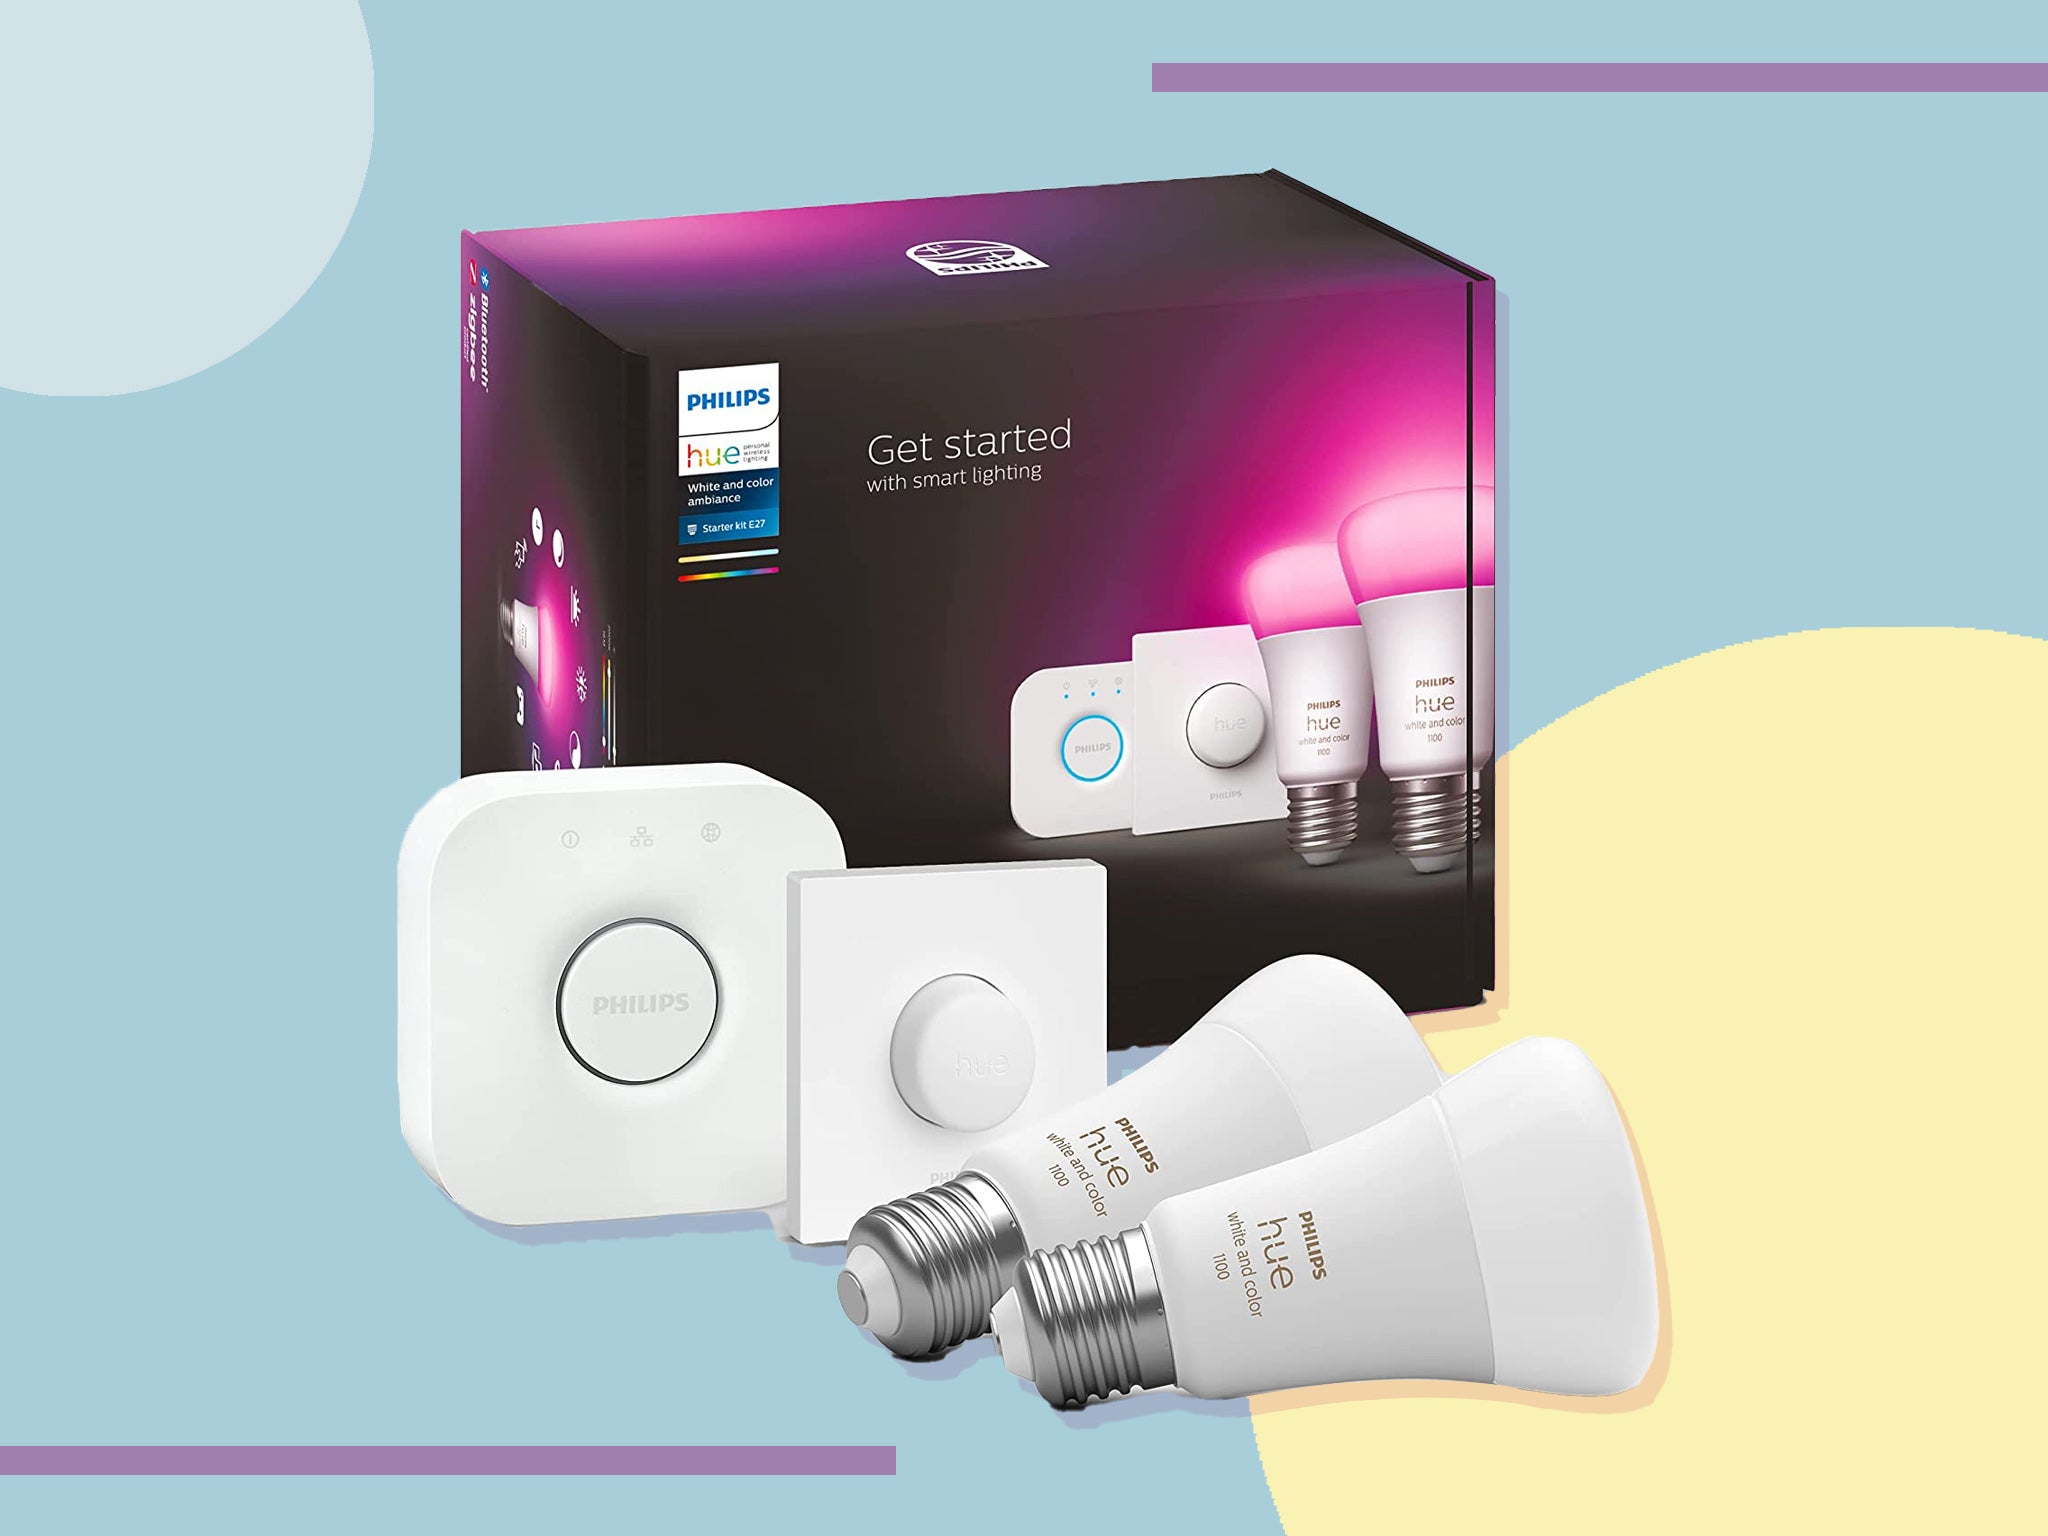 The Philips Hue lighting starter kit is almost half price at